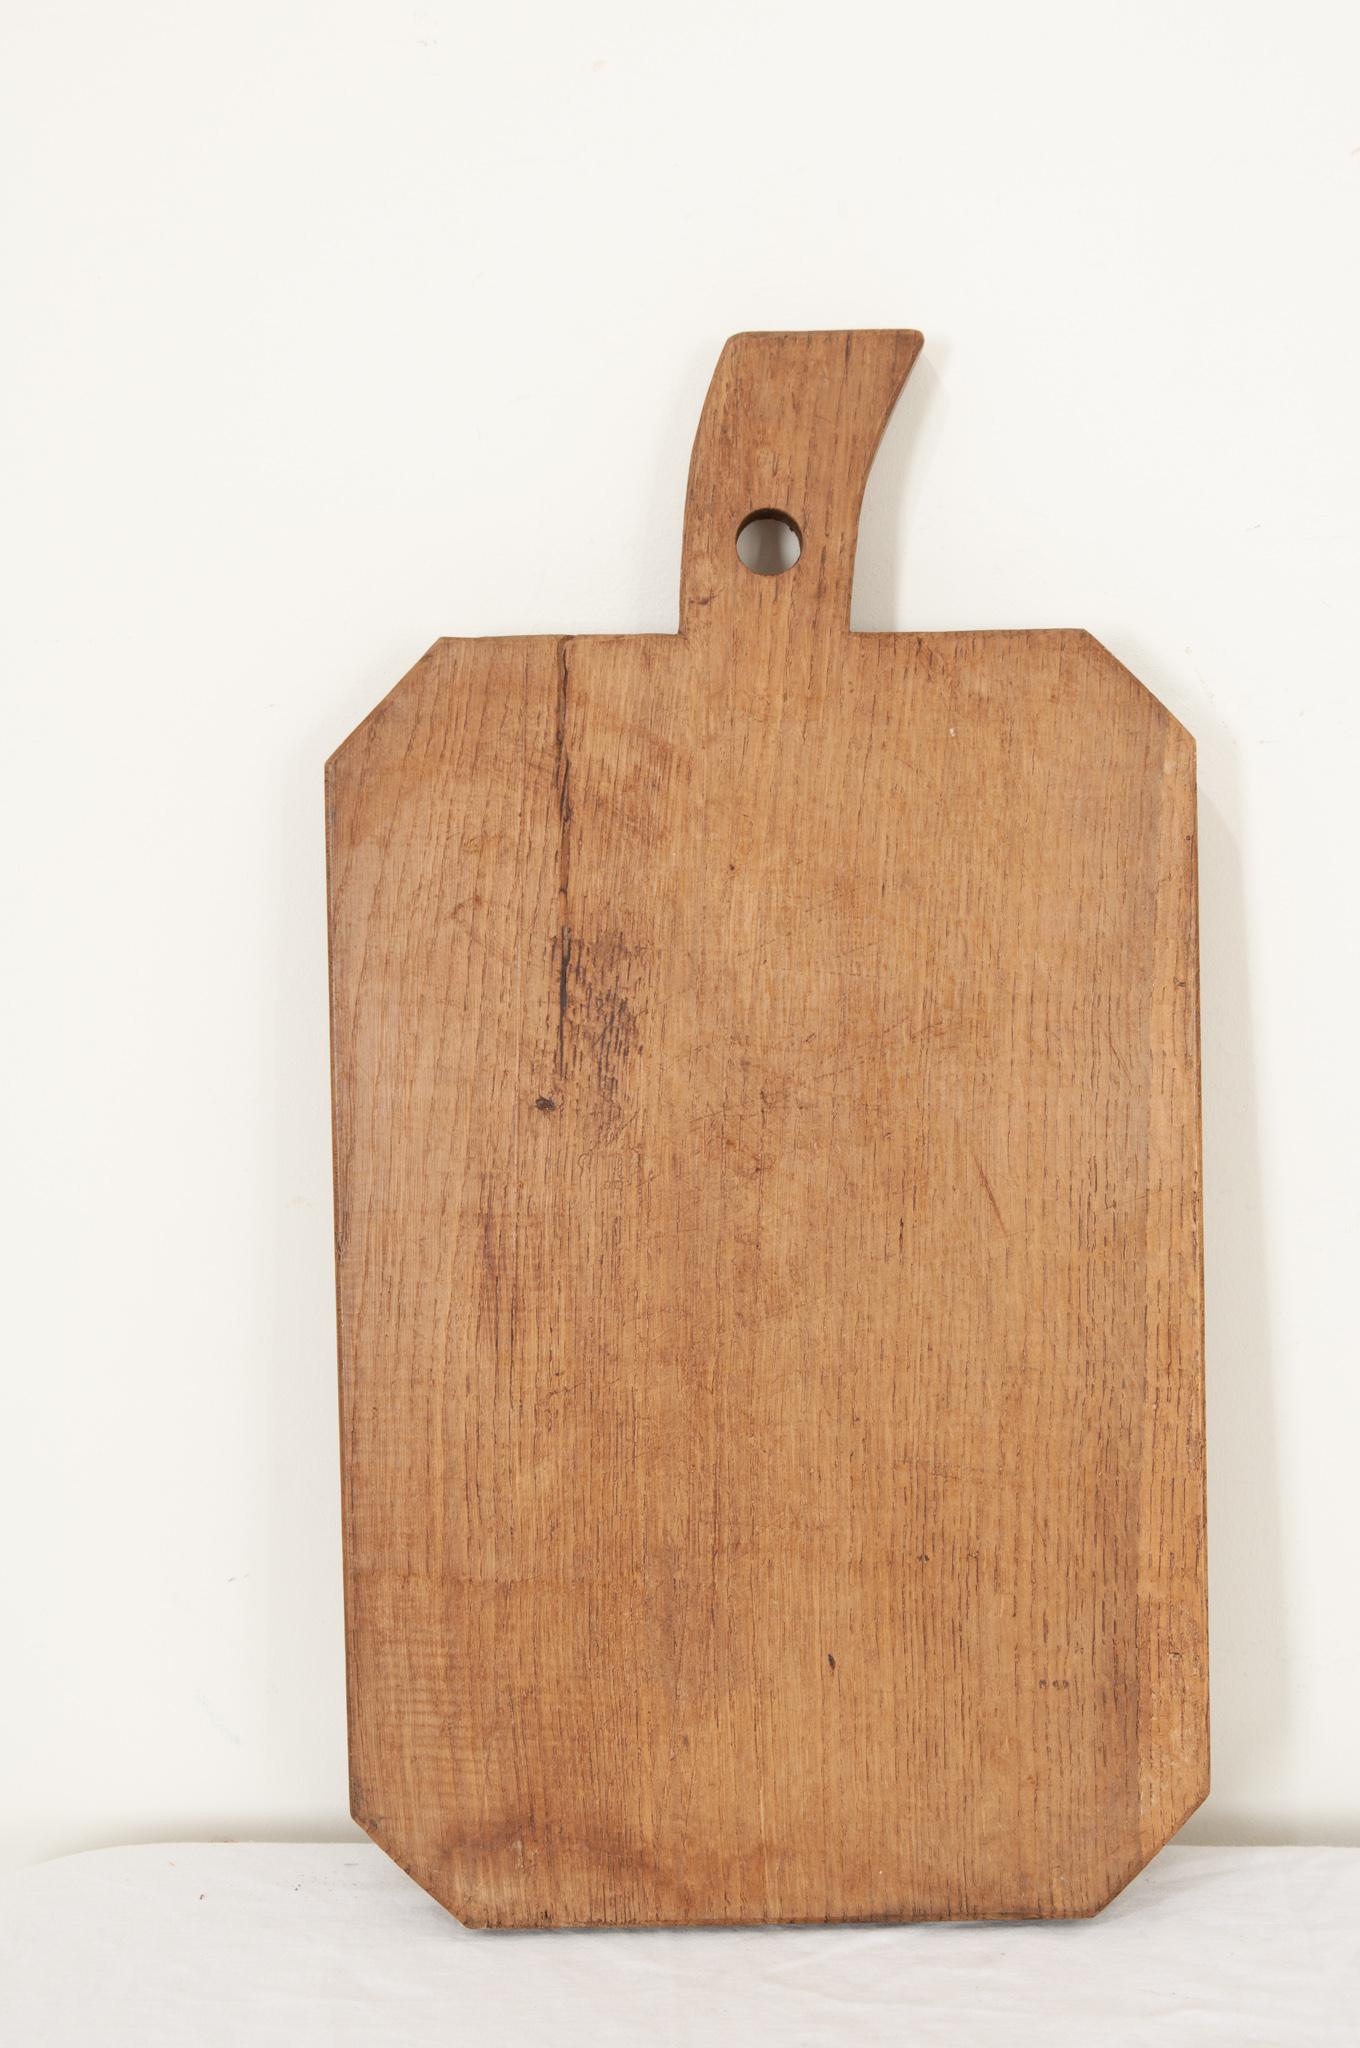 A large single plank wood cutting board from France in an interesting shape with canted corners and a handle shaped like stem. Knife marks and scrapes that were left by cooks, now long gone, can be seen and felt as if they were made yesterday. A